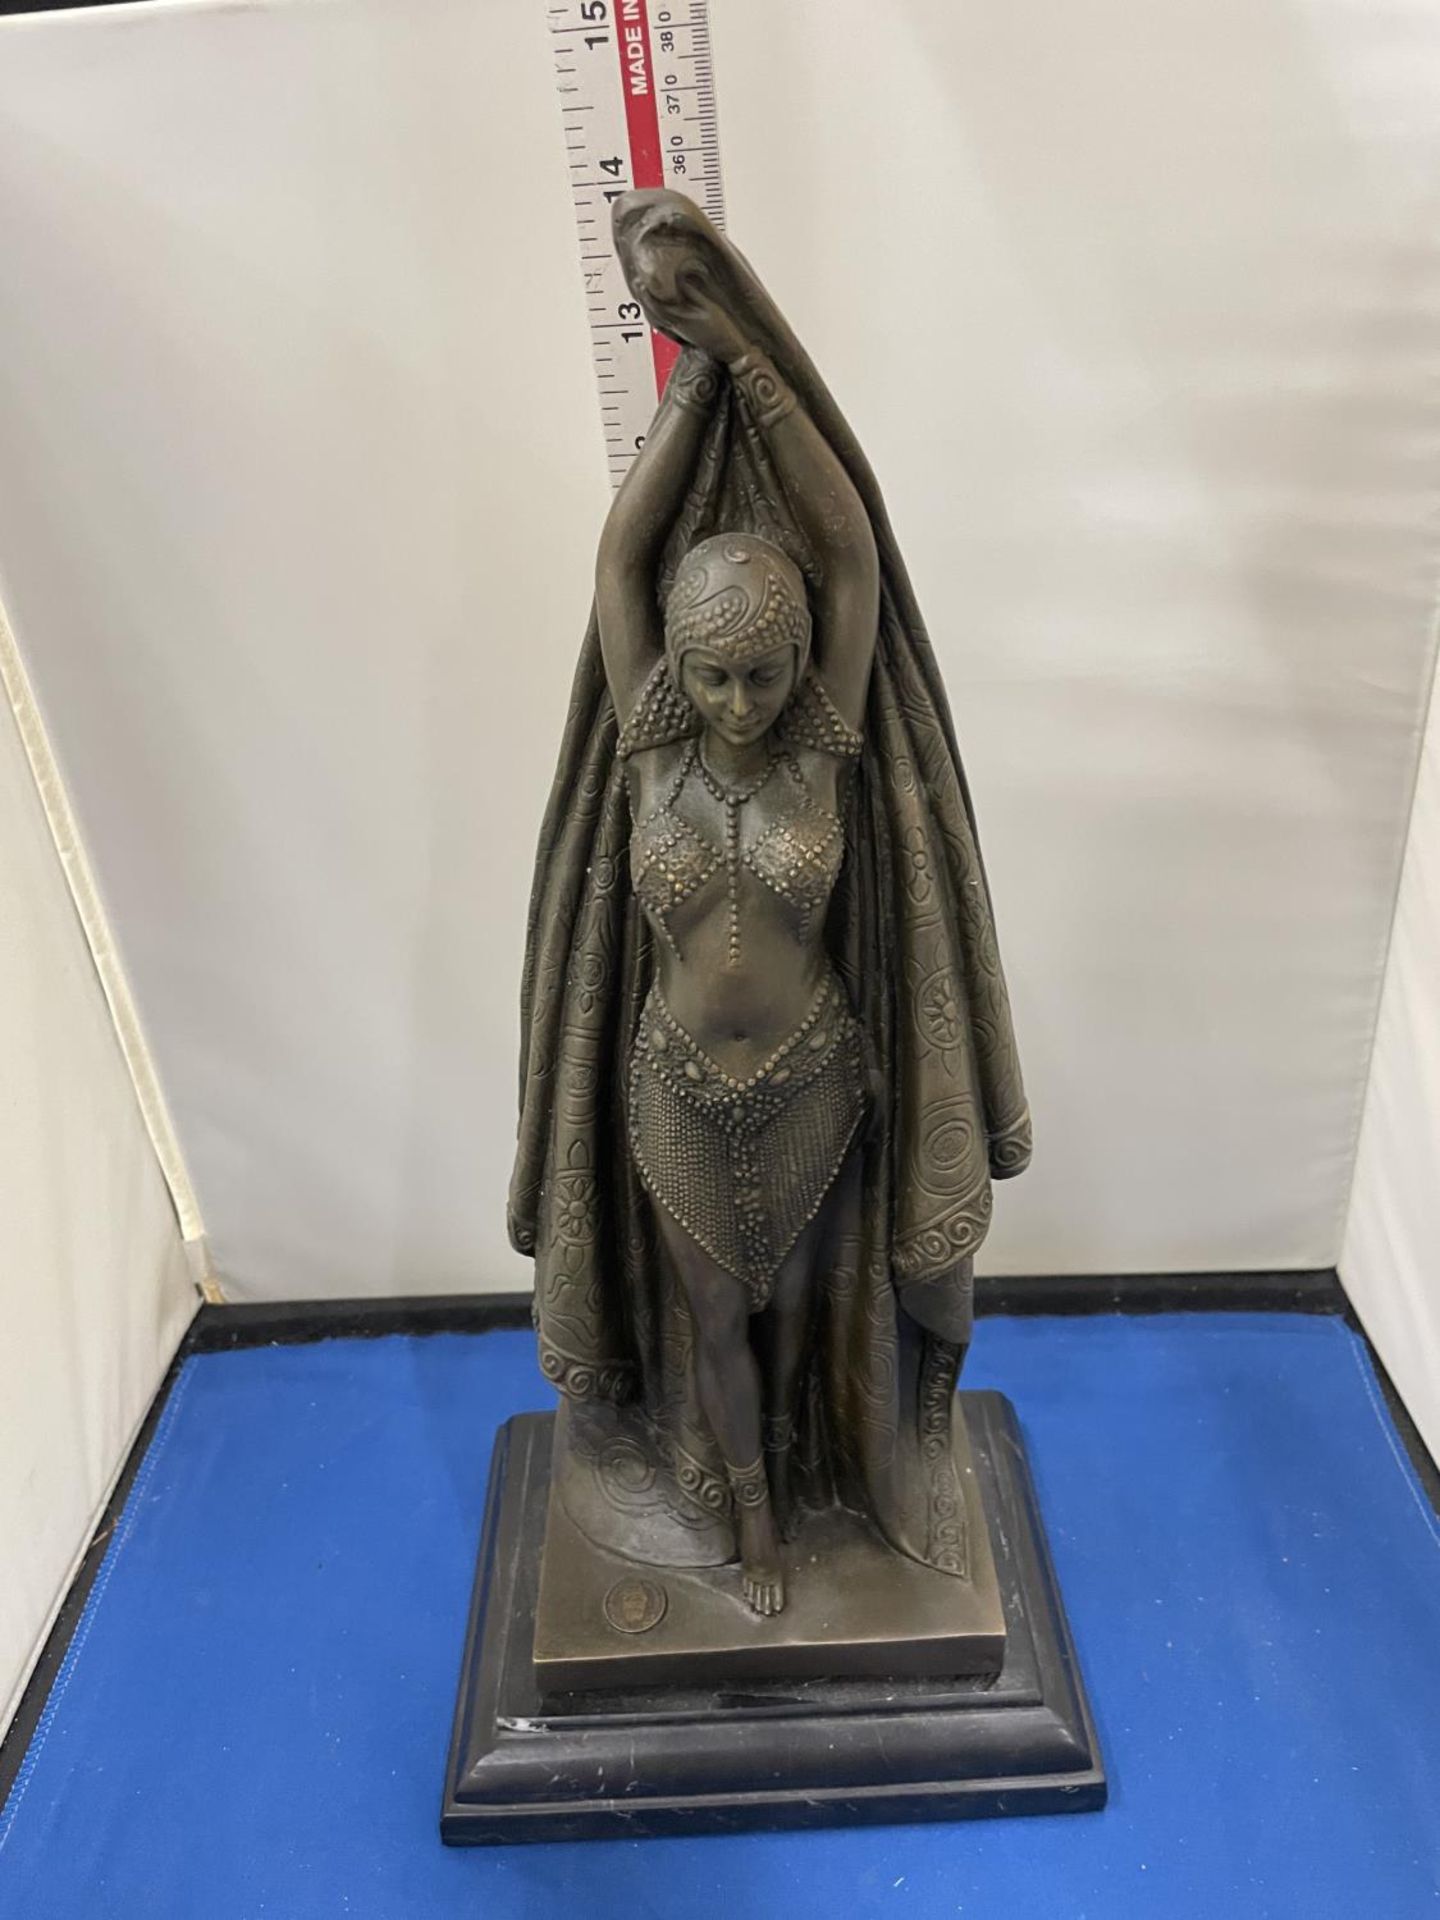 A ART NOUVEAU STYLE BRONZE AFTER DEMETRE CHIPARUS RAMESE'S ENTERTAINER DANCER ART WITH STAMP - Image 7 of 12